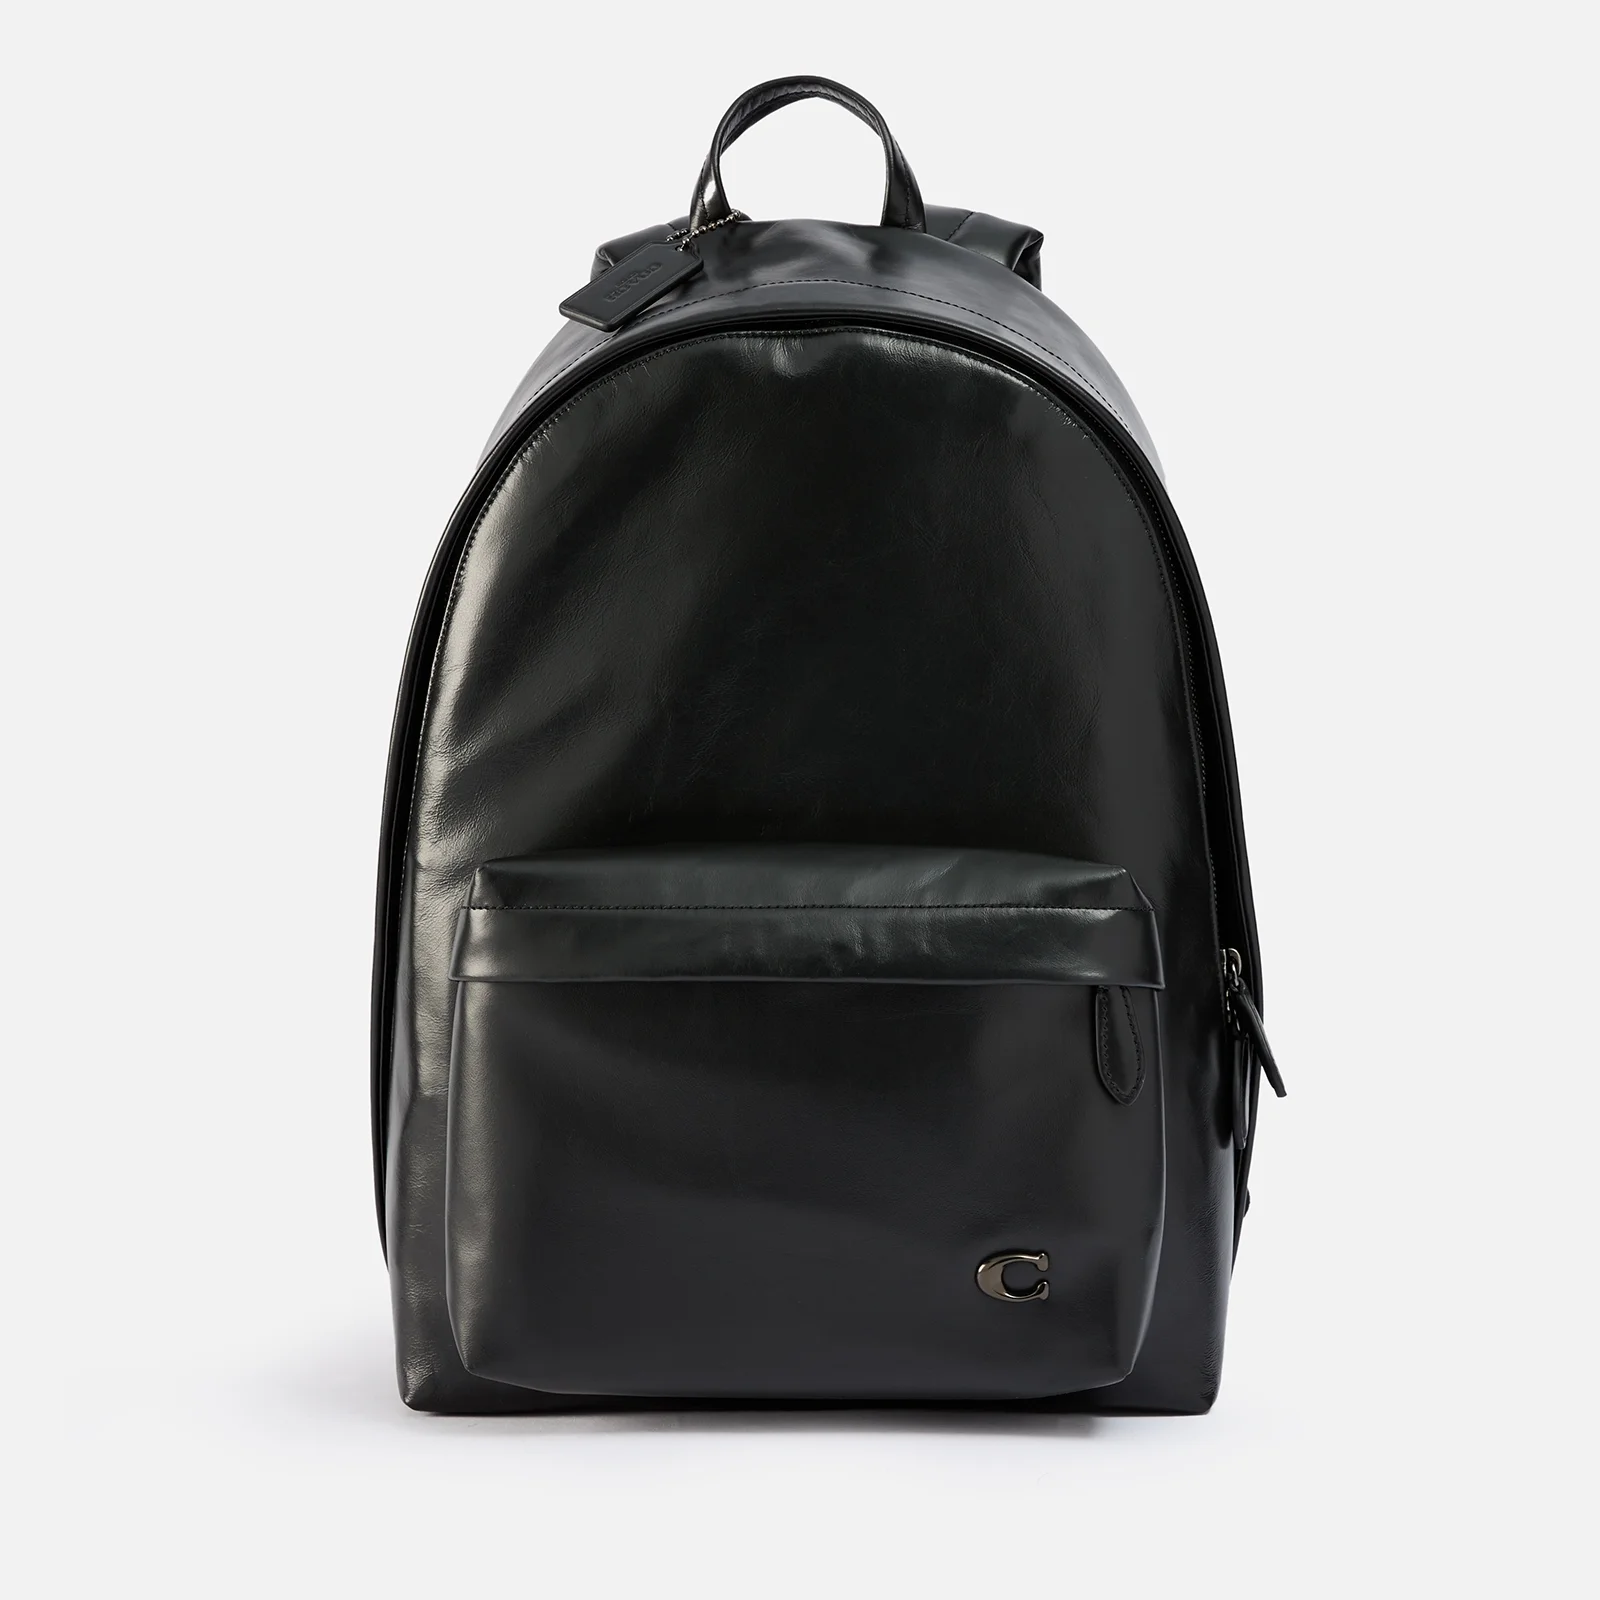 Coach Paperweight Hall Leather Backpack Image 1